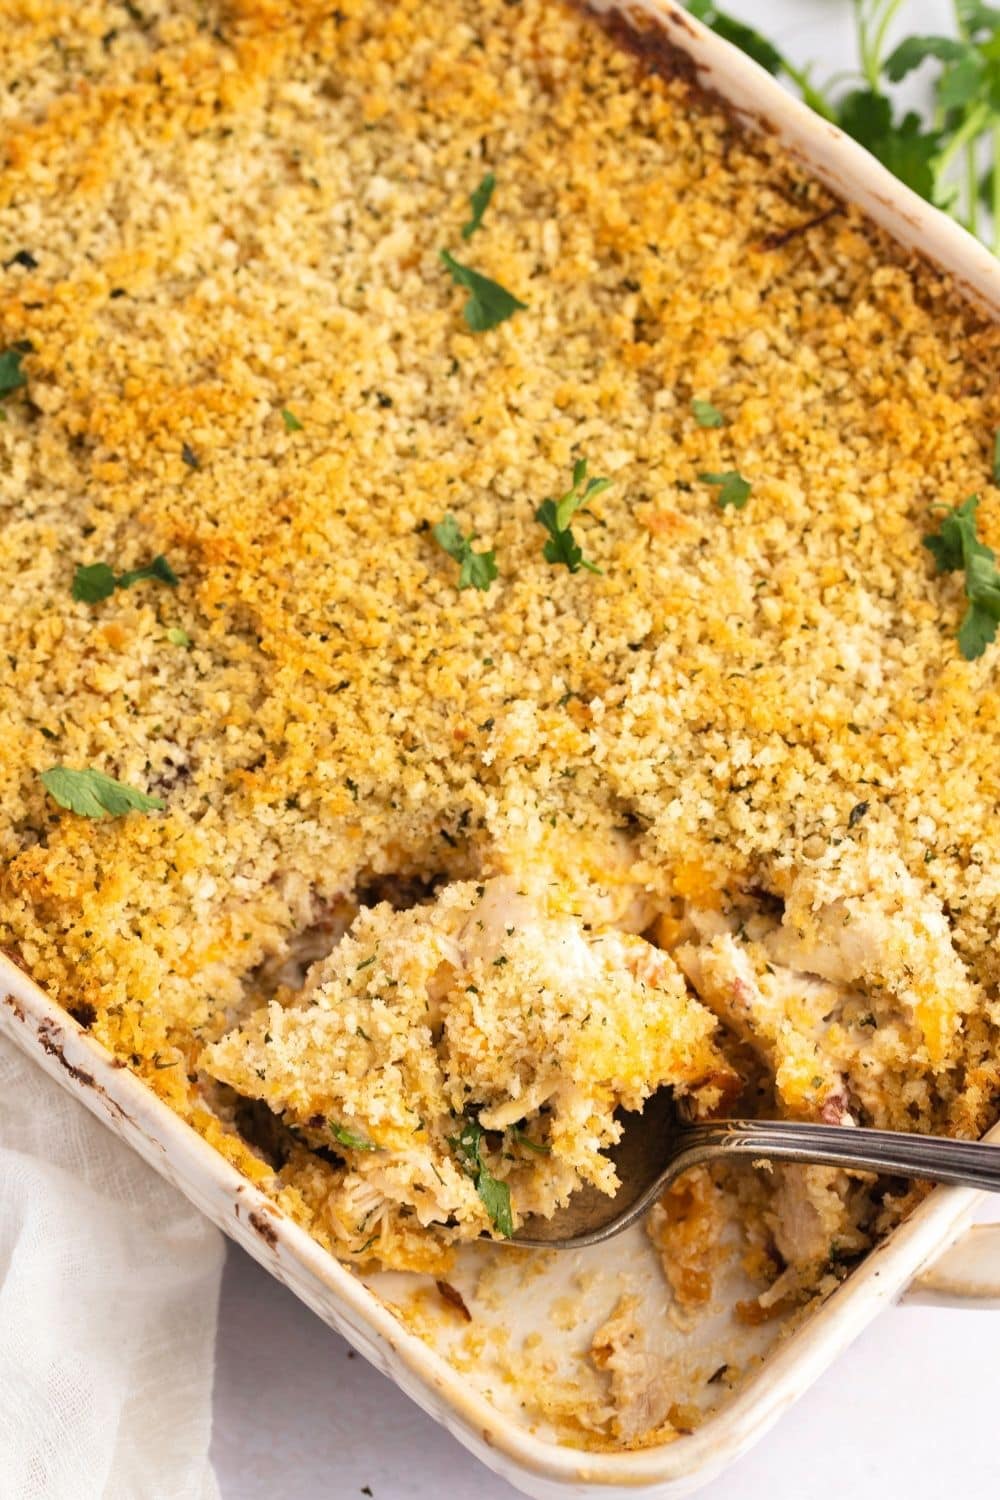 Hearty and Warming Crack Chicken Casserole